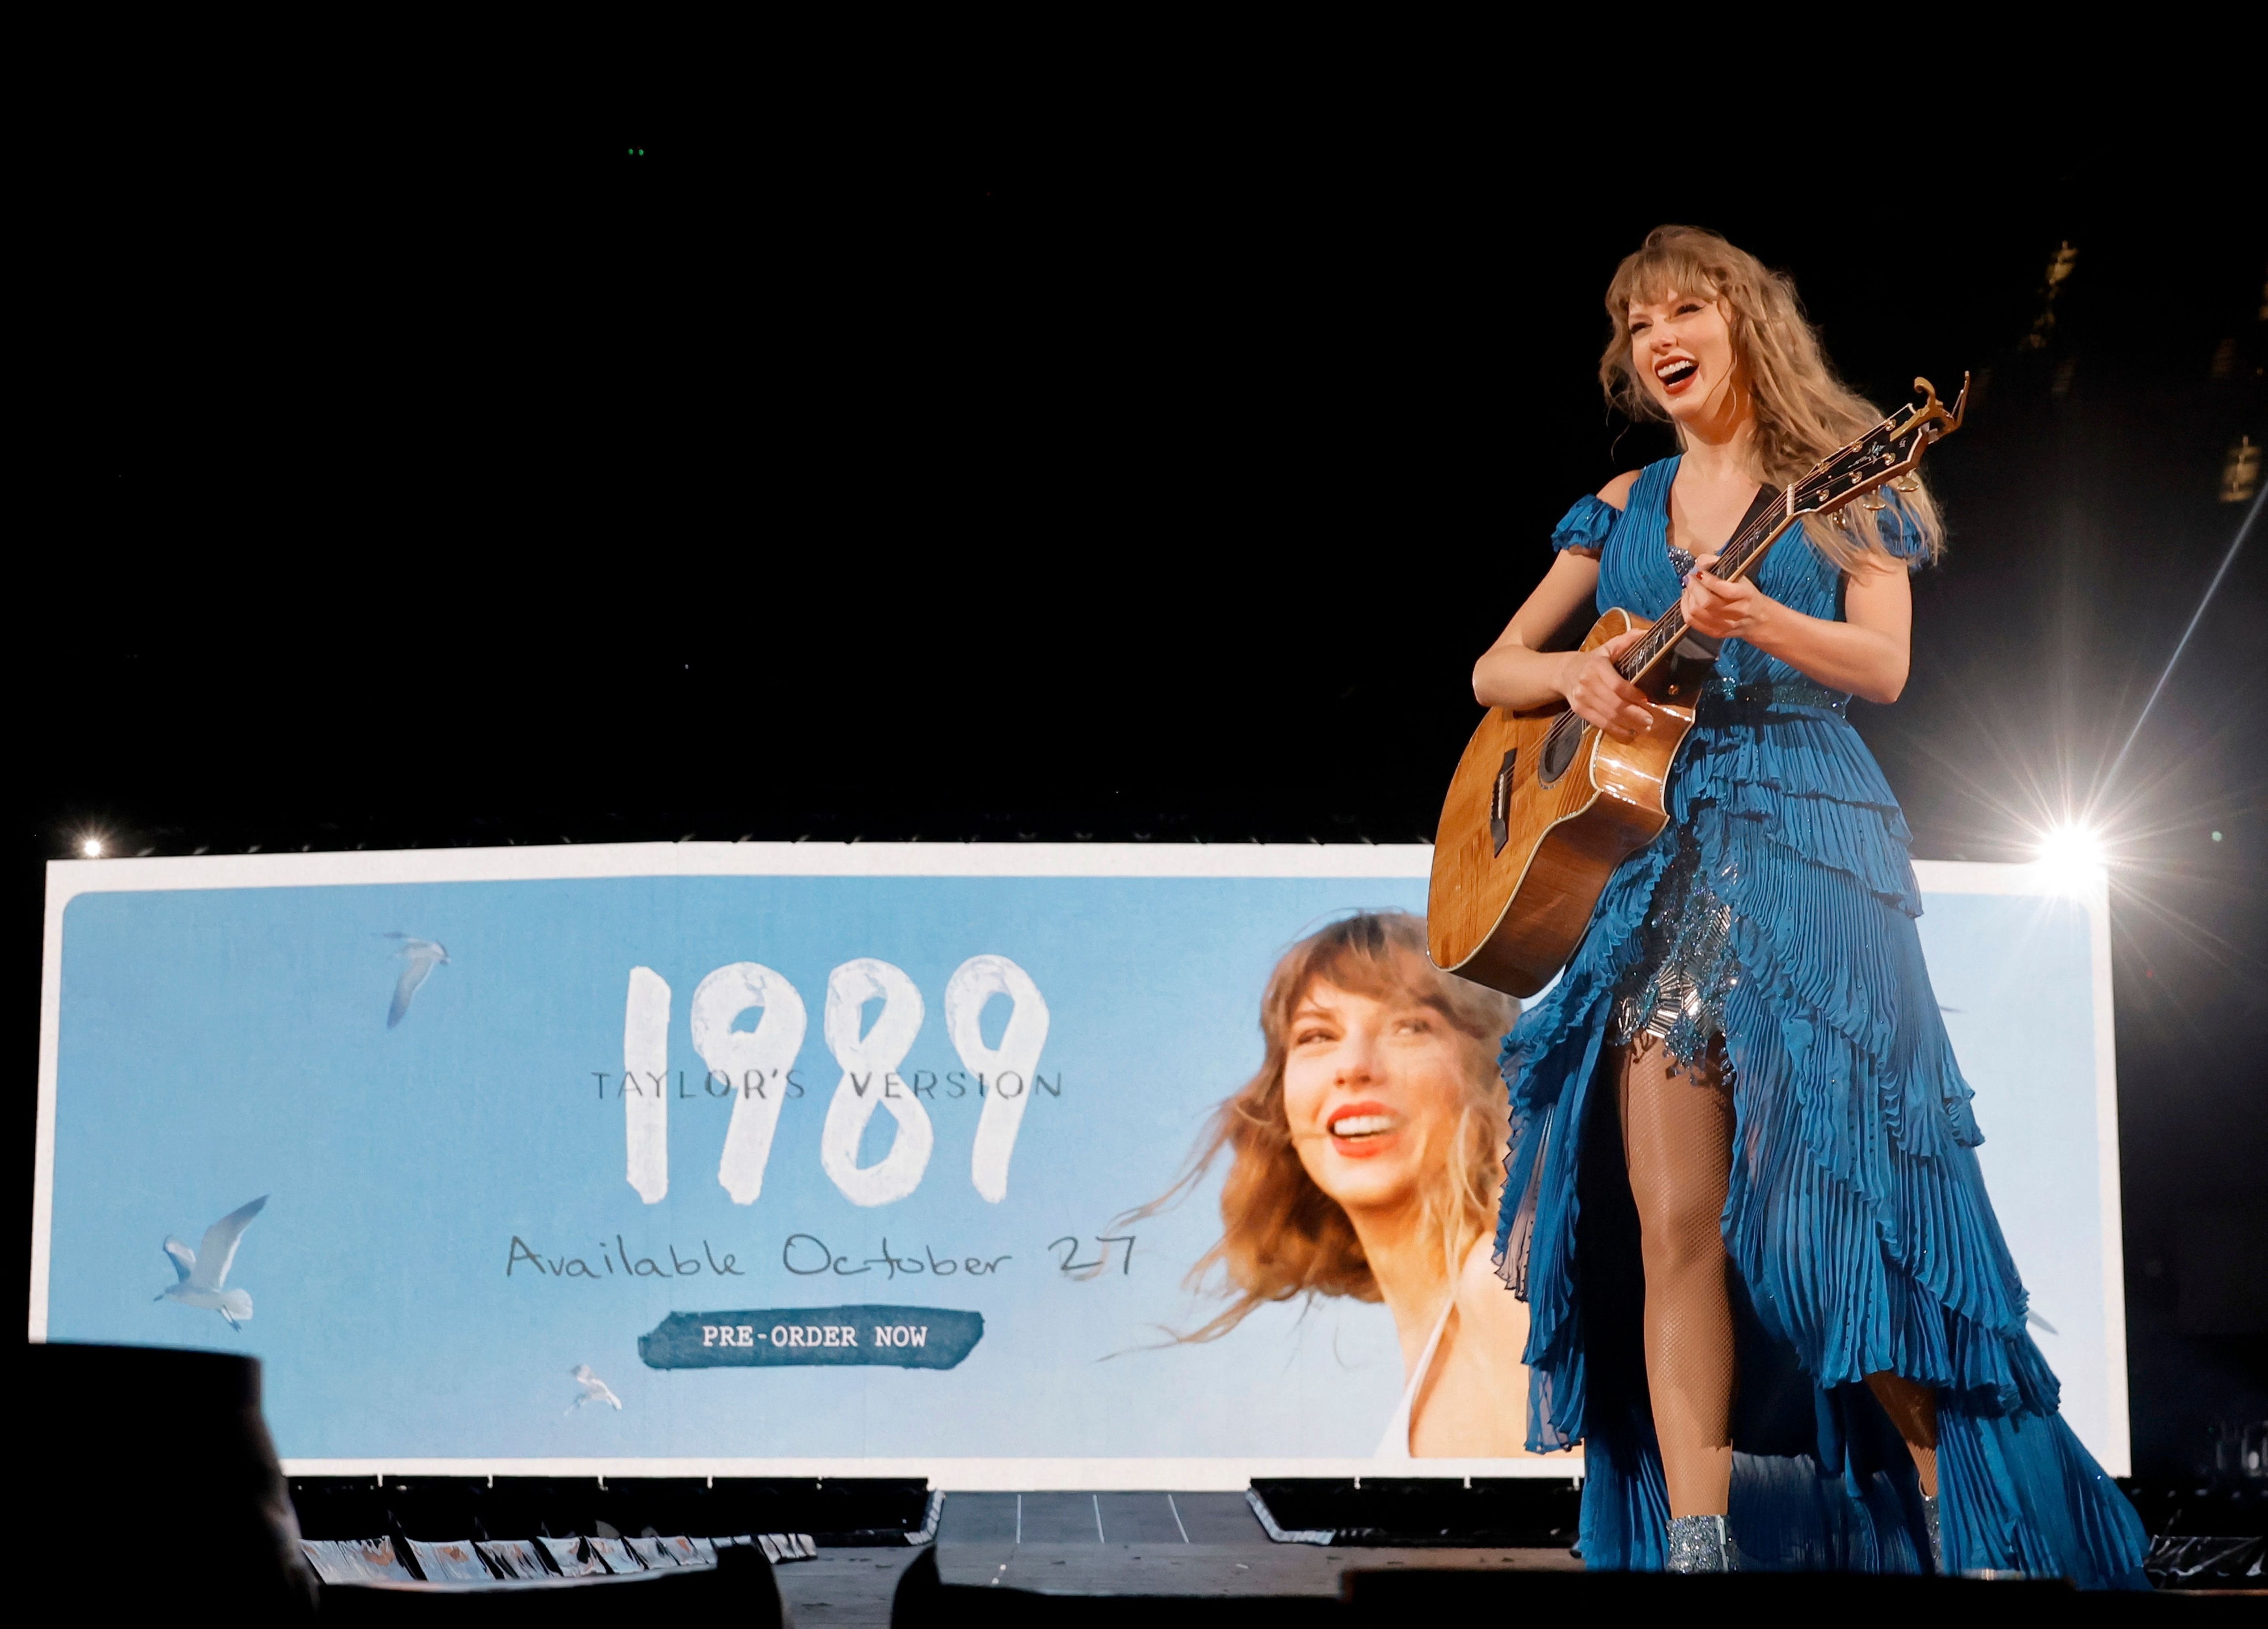 Close-up of Taylor onstage with a guitar with the announcement and cover art behind her